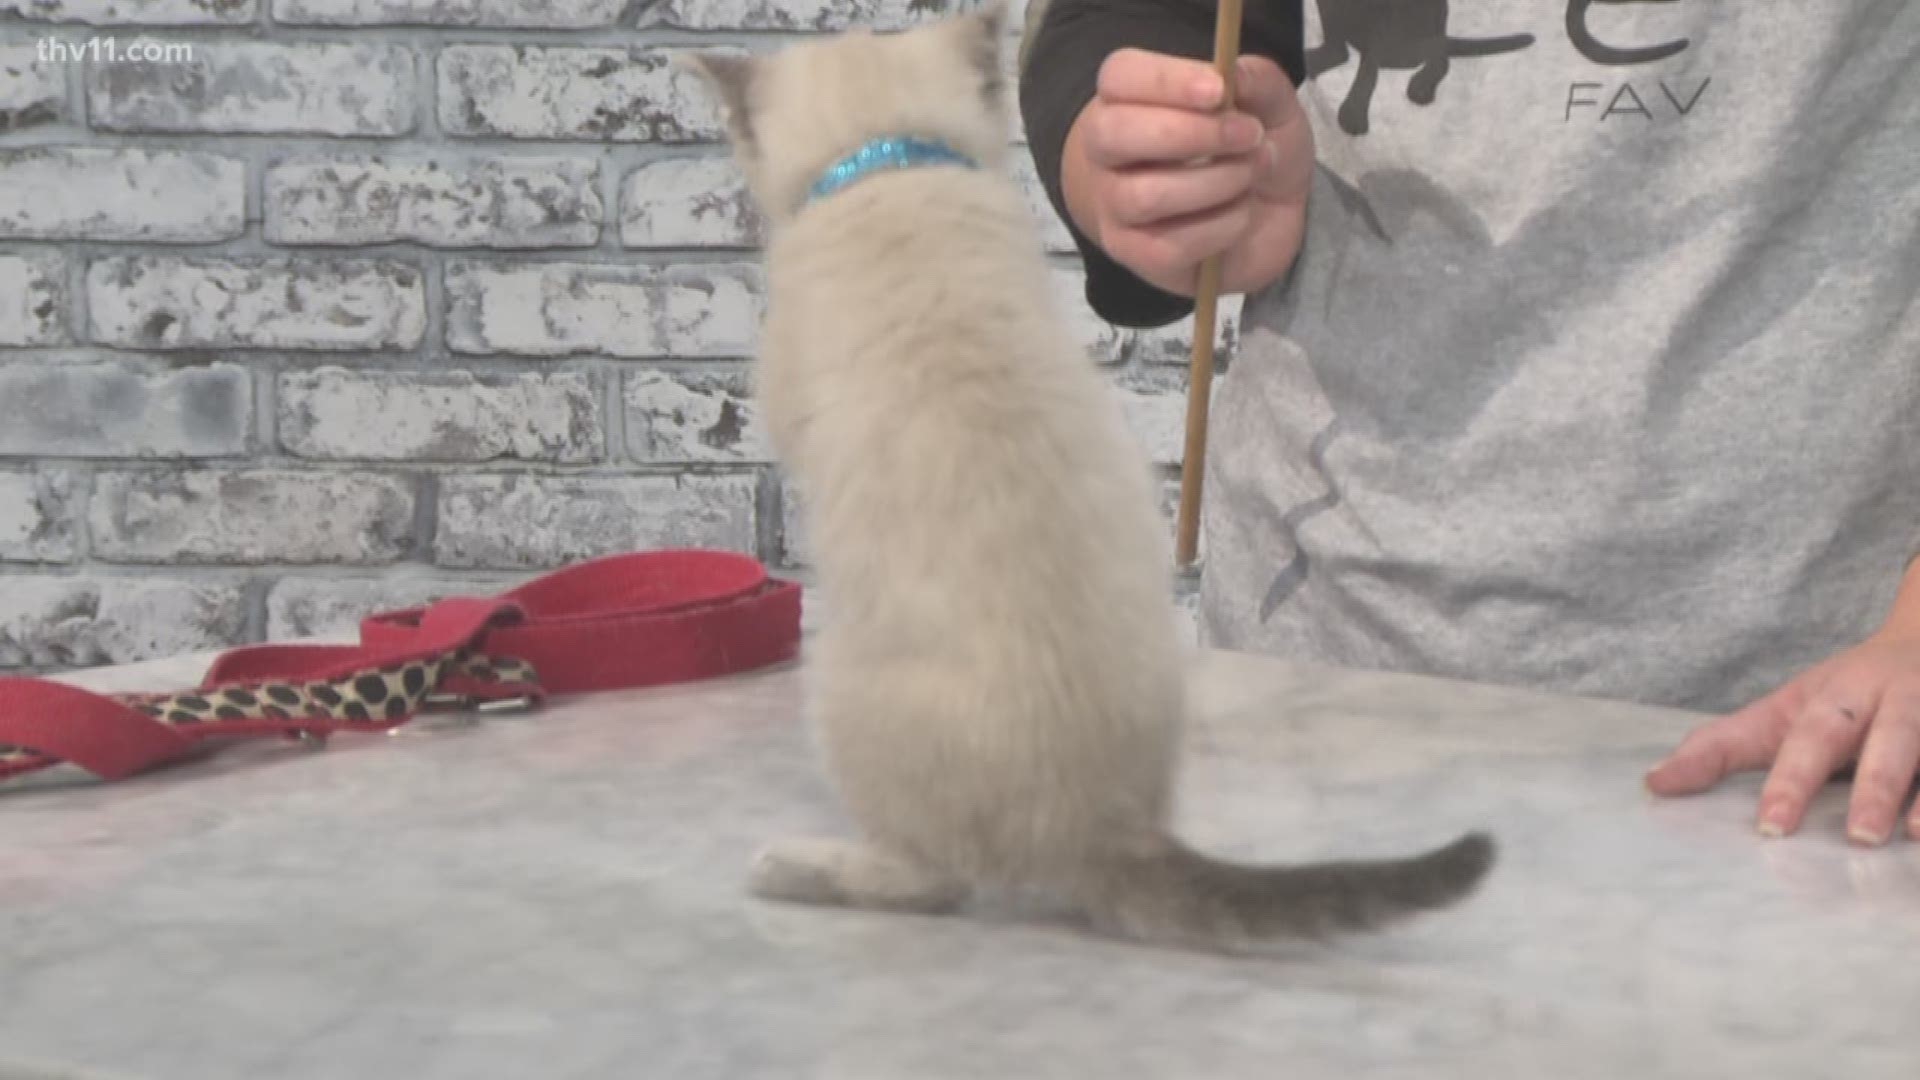 Betsy Robb from Friends of the Animal Village in Little Rock is here with an adorable kitten, Mr. Sinatra!